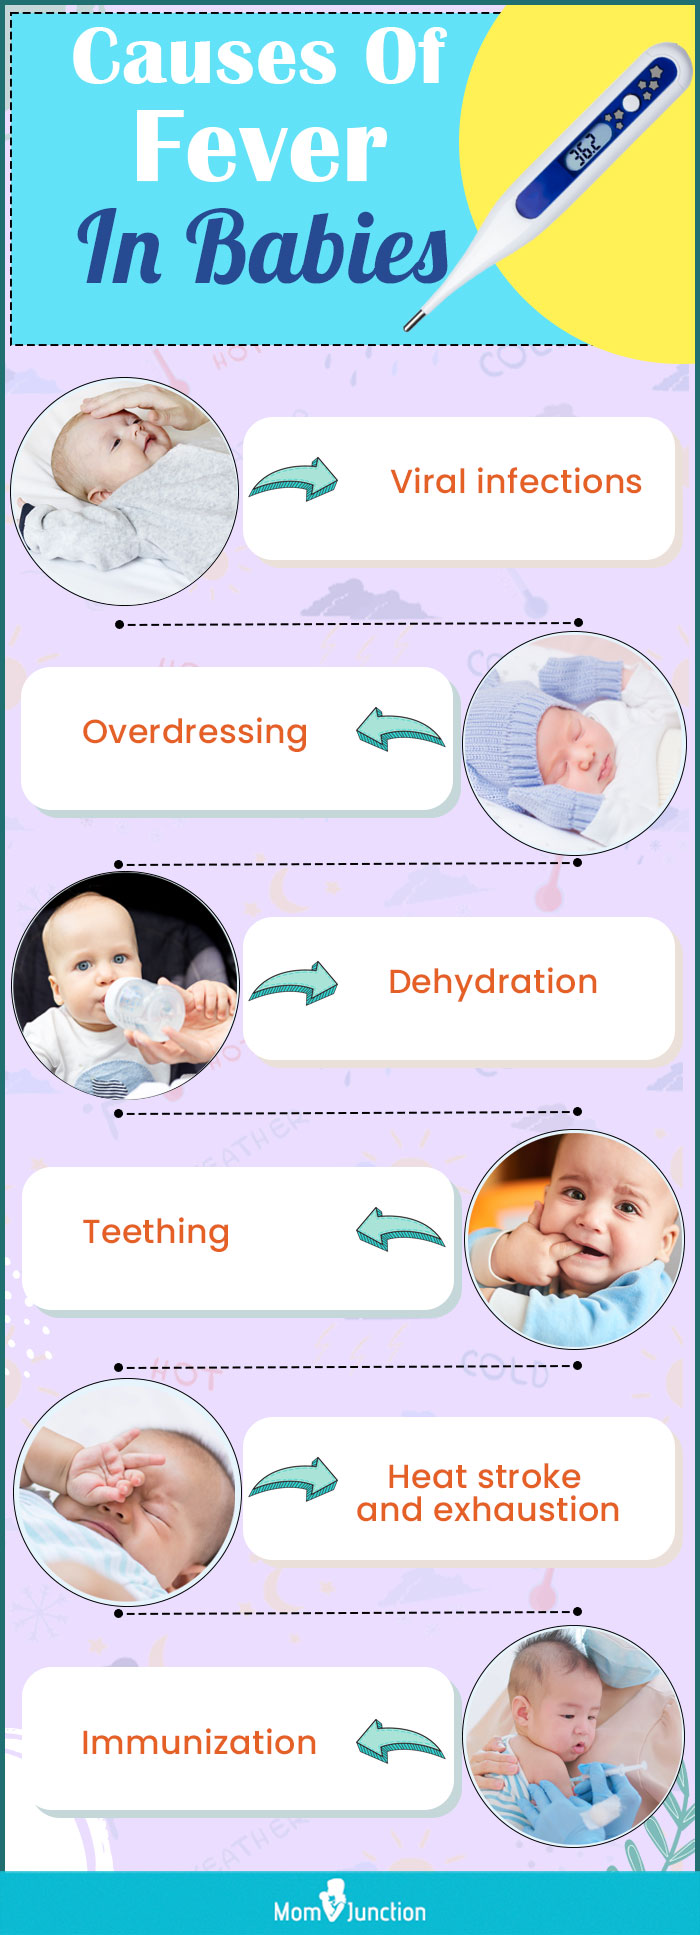 causes of fever in babies (infographic)